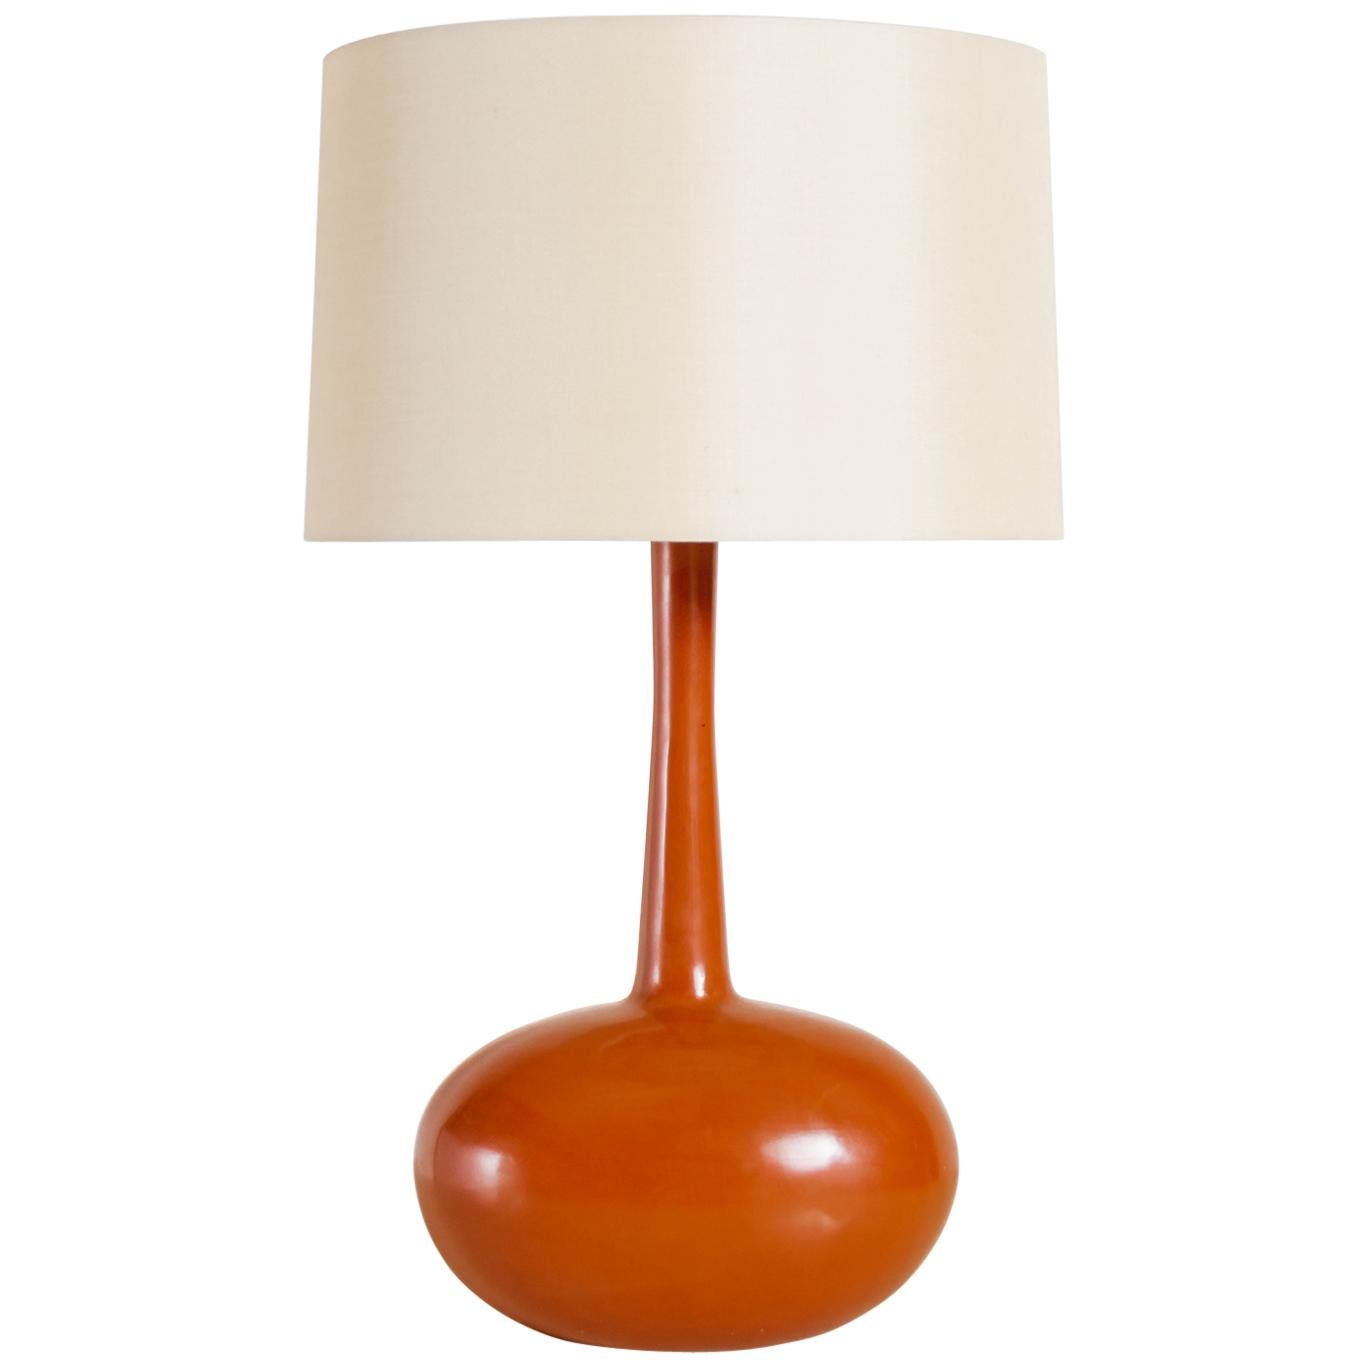 Tall Cocoon Table Lamp, Mila Lacquer by Robert Kuo, Hand Repousse, Limited For Sale